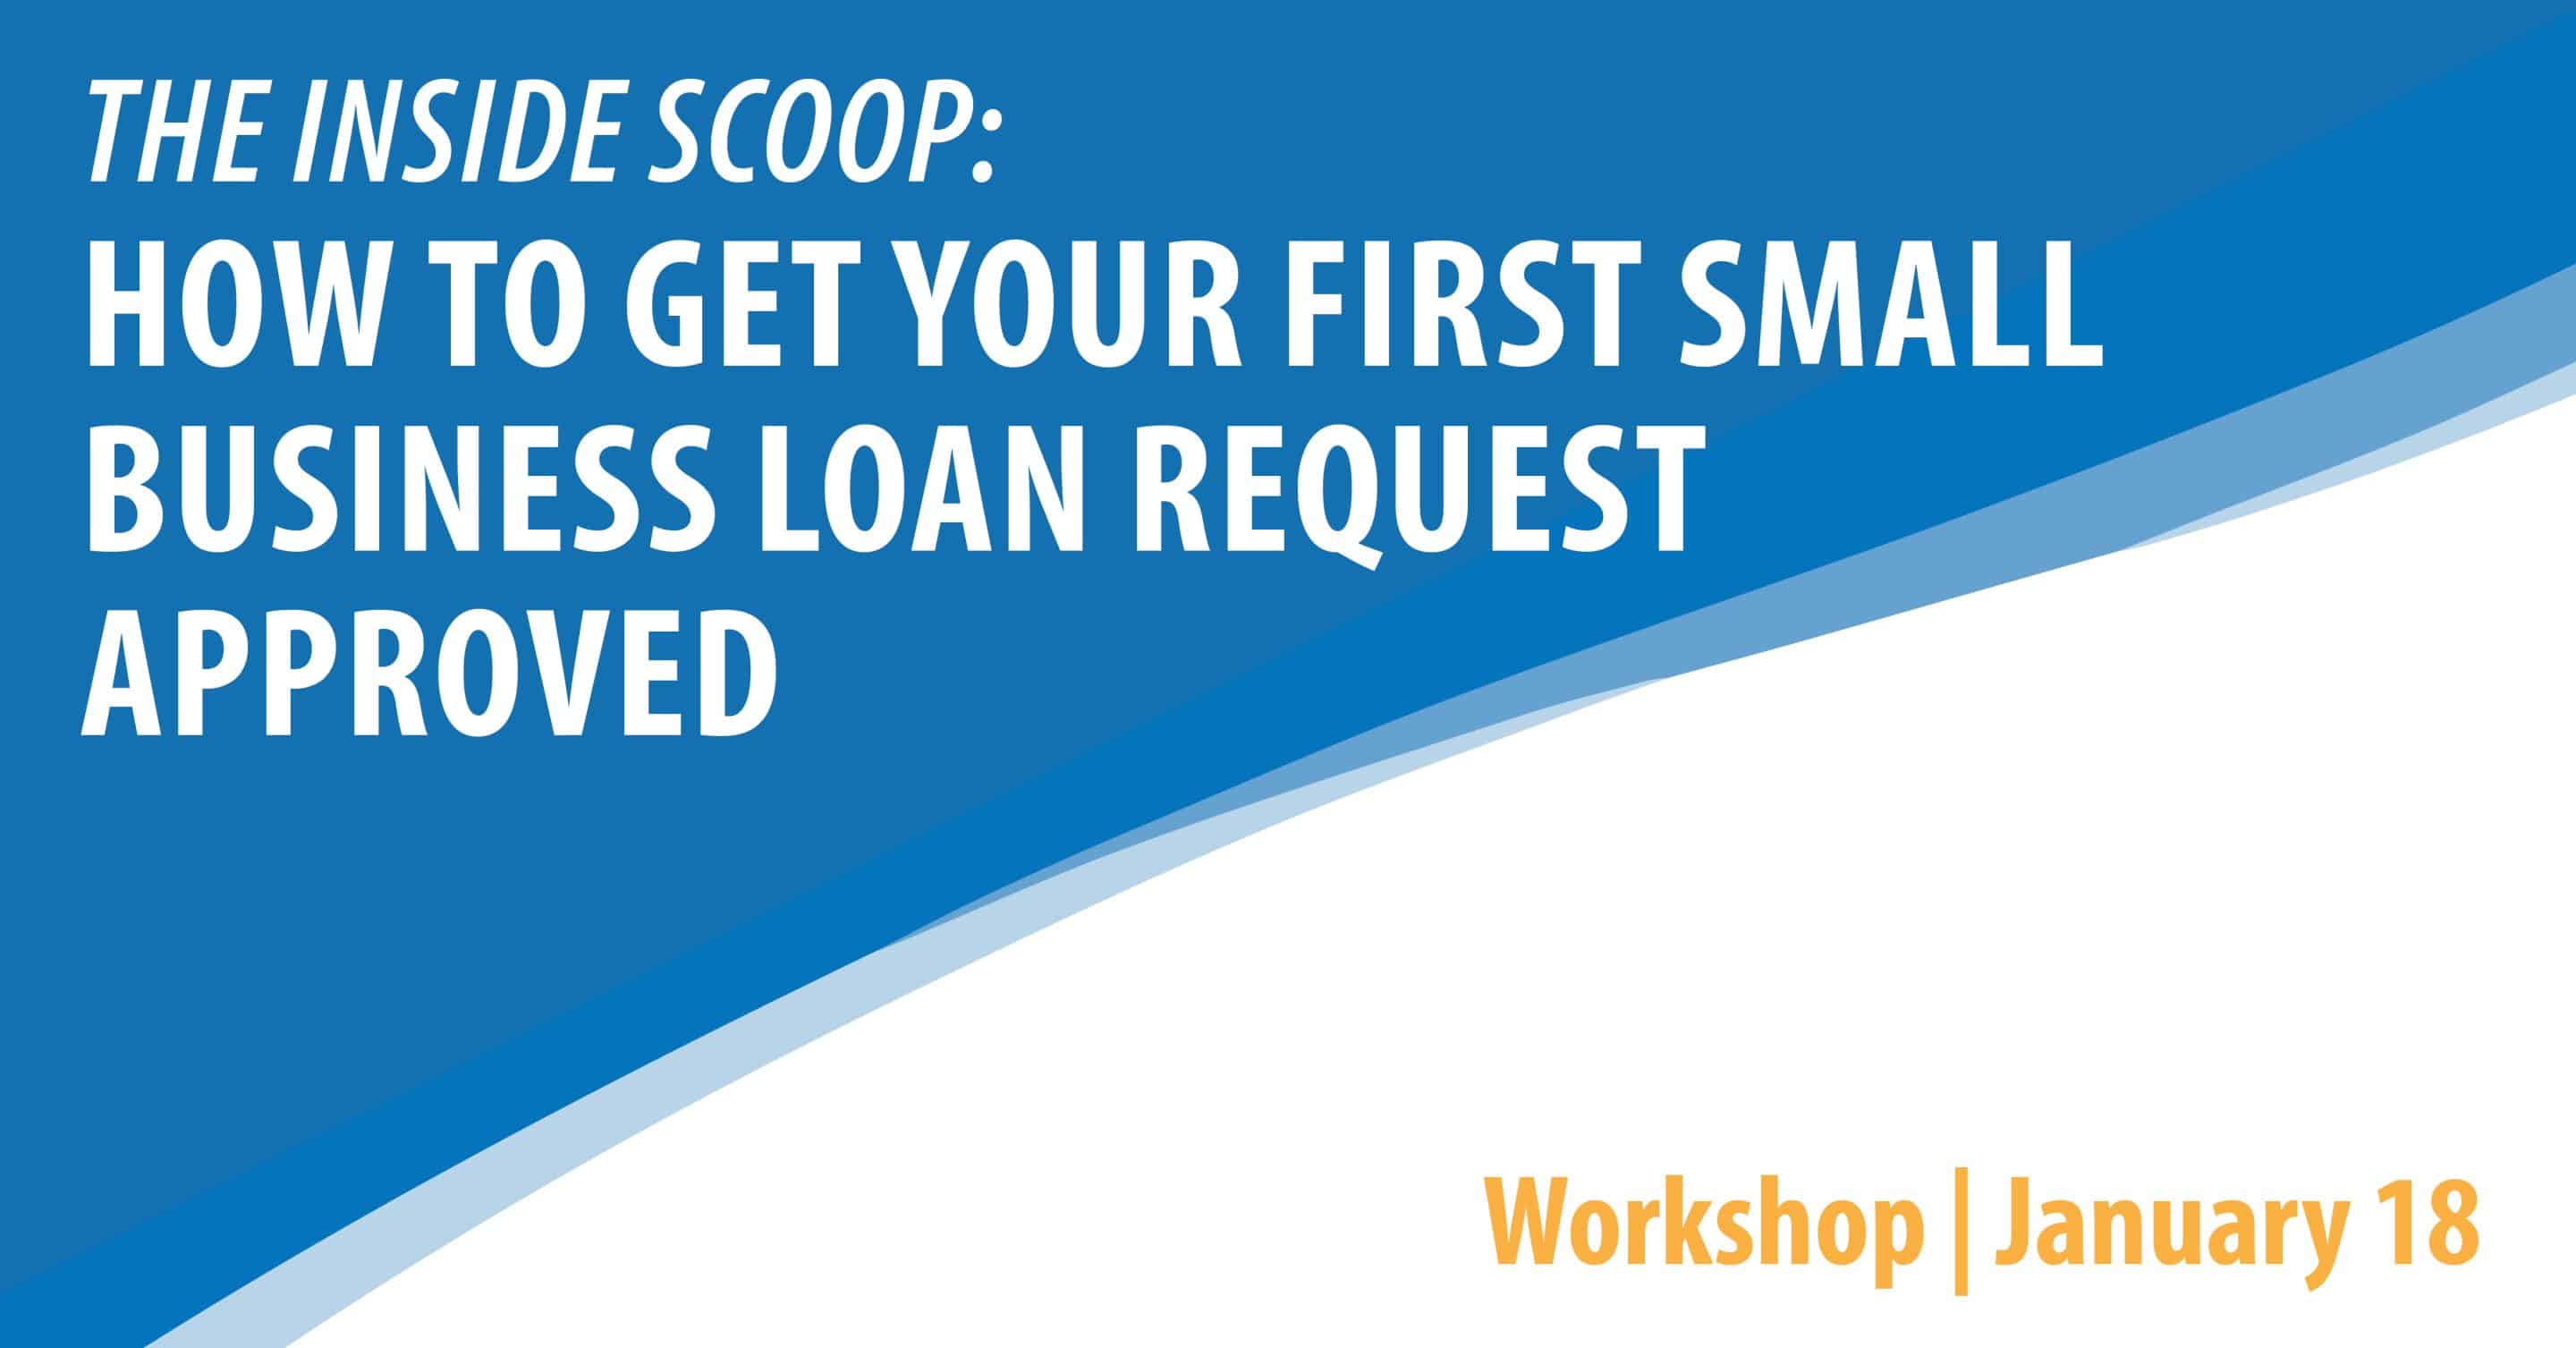 The Inside Scoop:  How to Get Your First Small Business Loan Request Approved - Wheatland